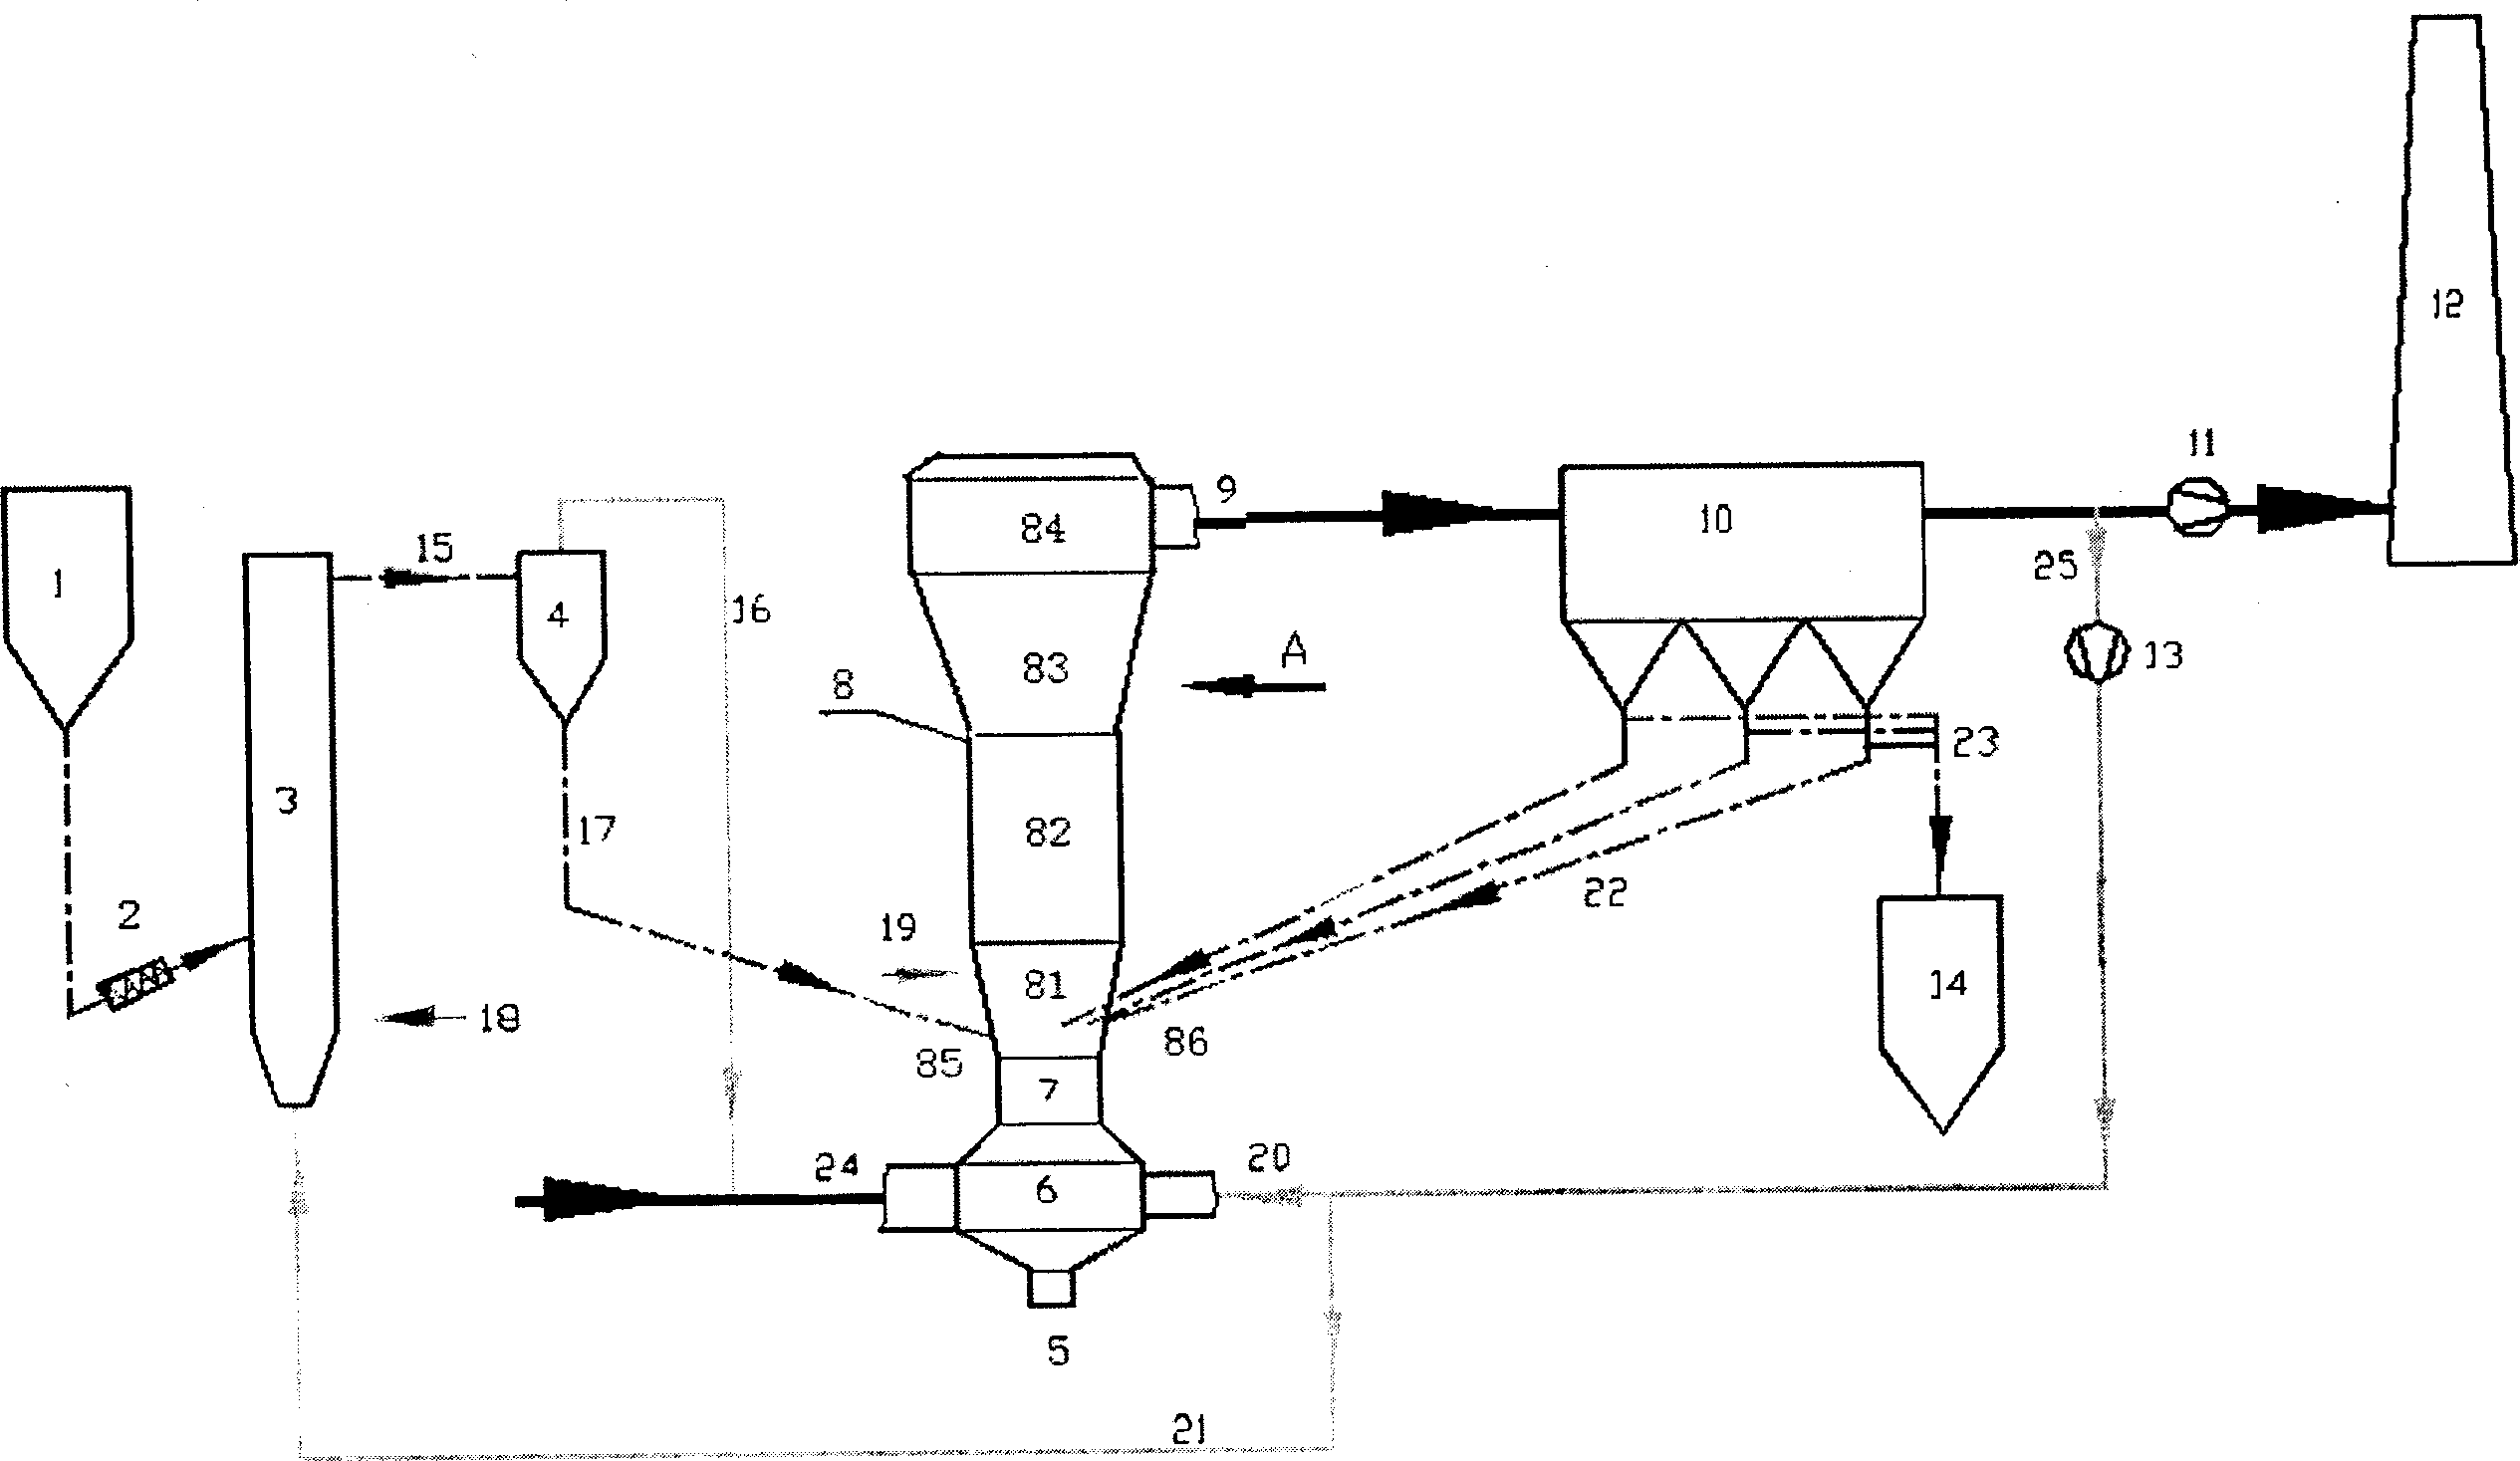 Composite Circulation fluidized dry desulfurization process for flue gas and desalfurizing reaction tower